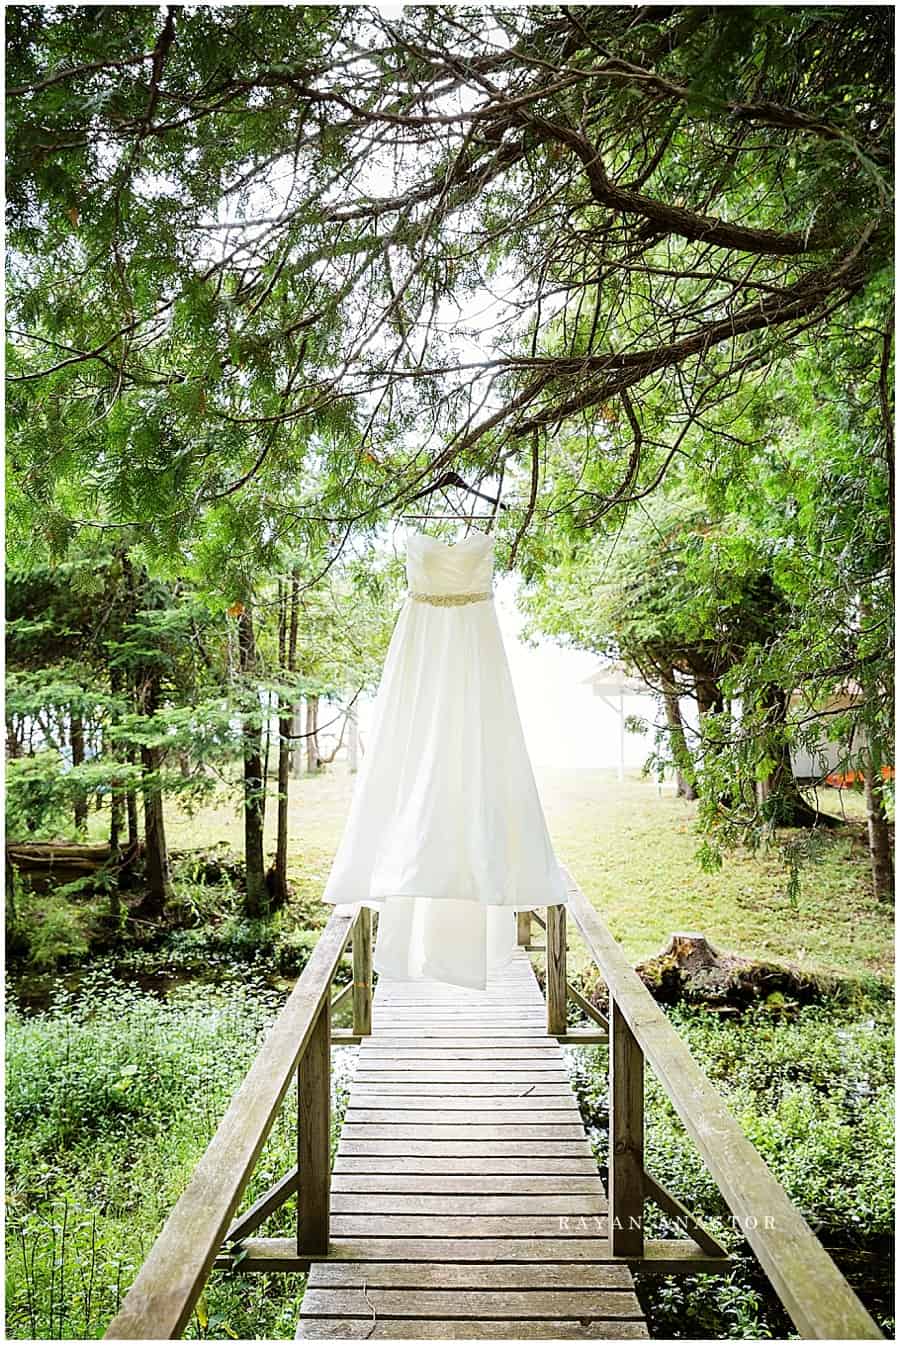 wedding dress hanging from a pine tree at the red shutter